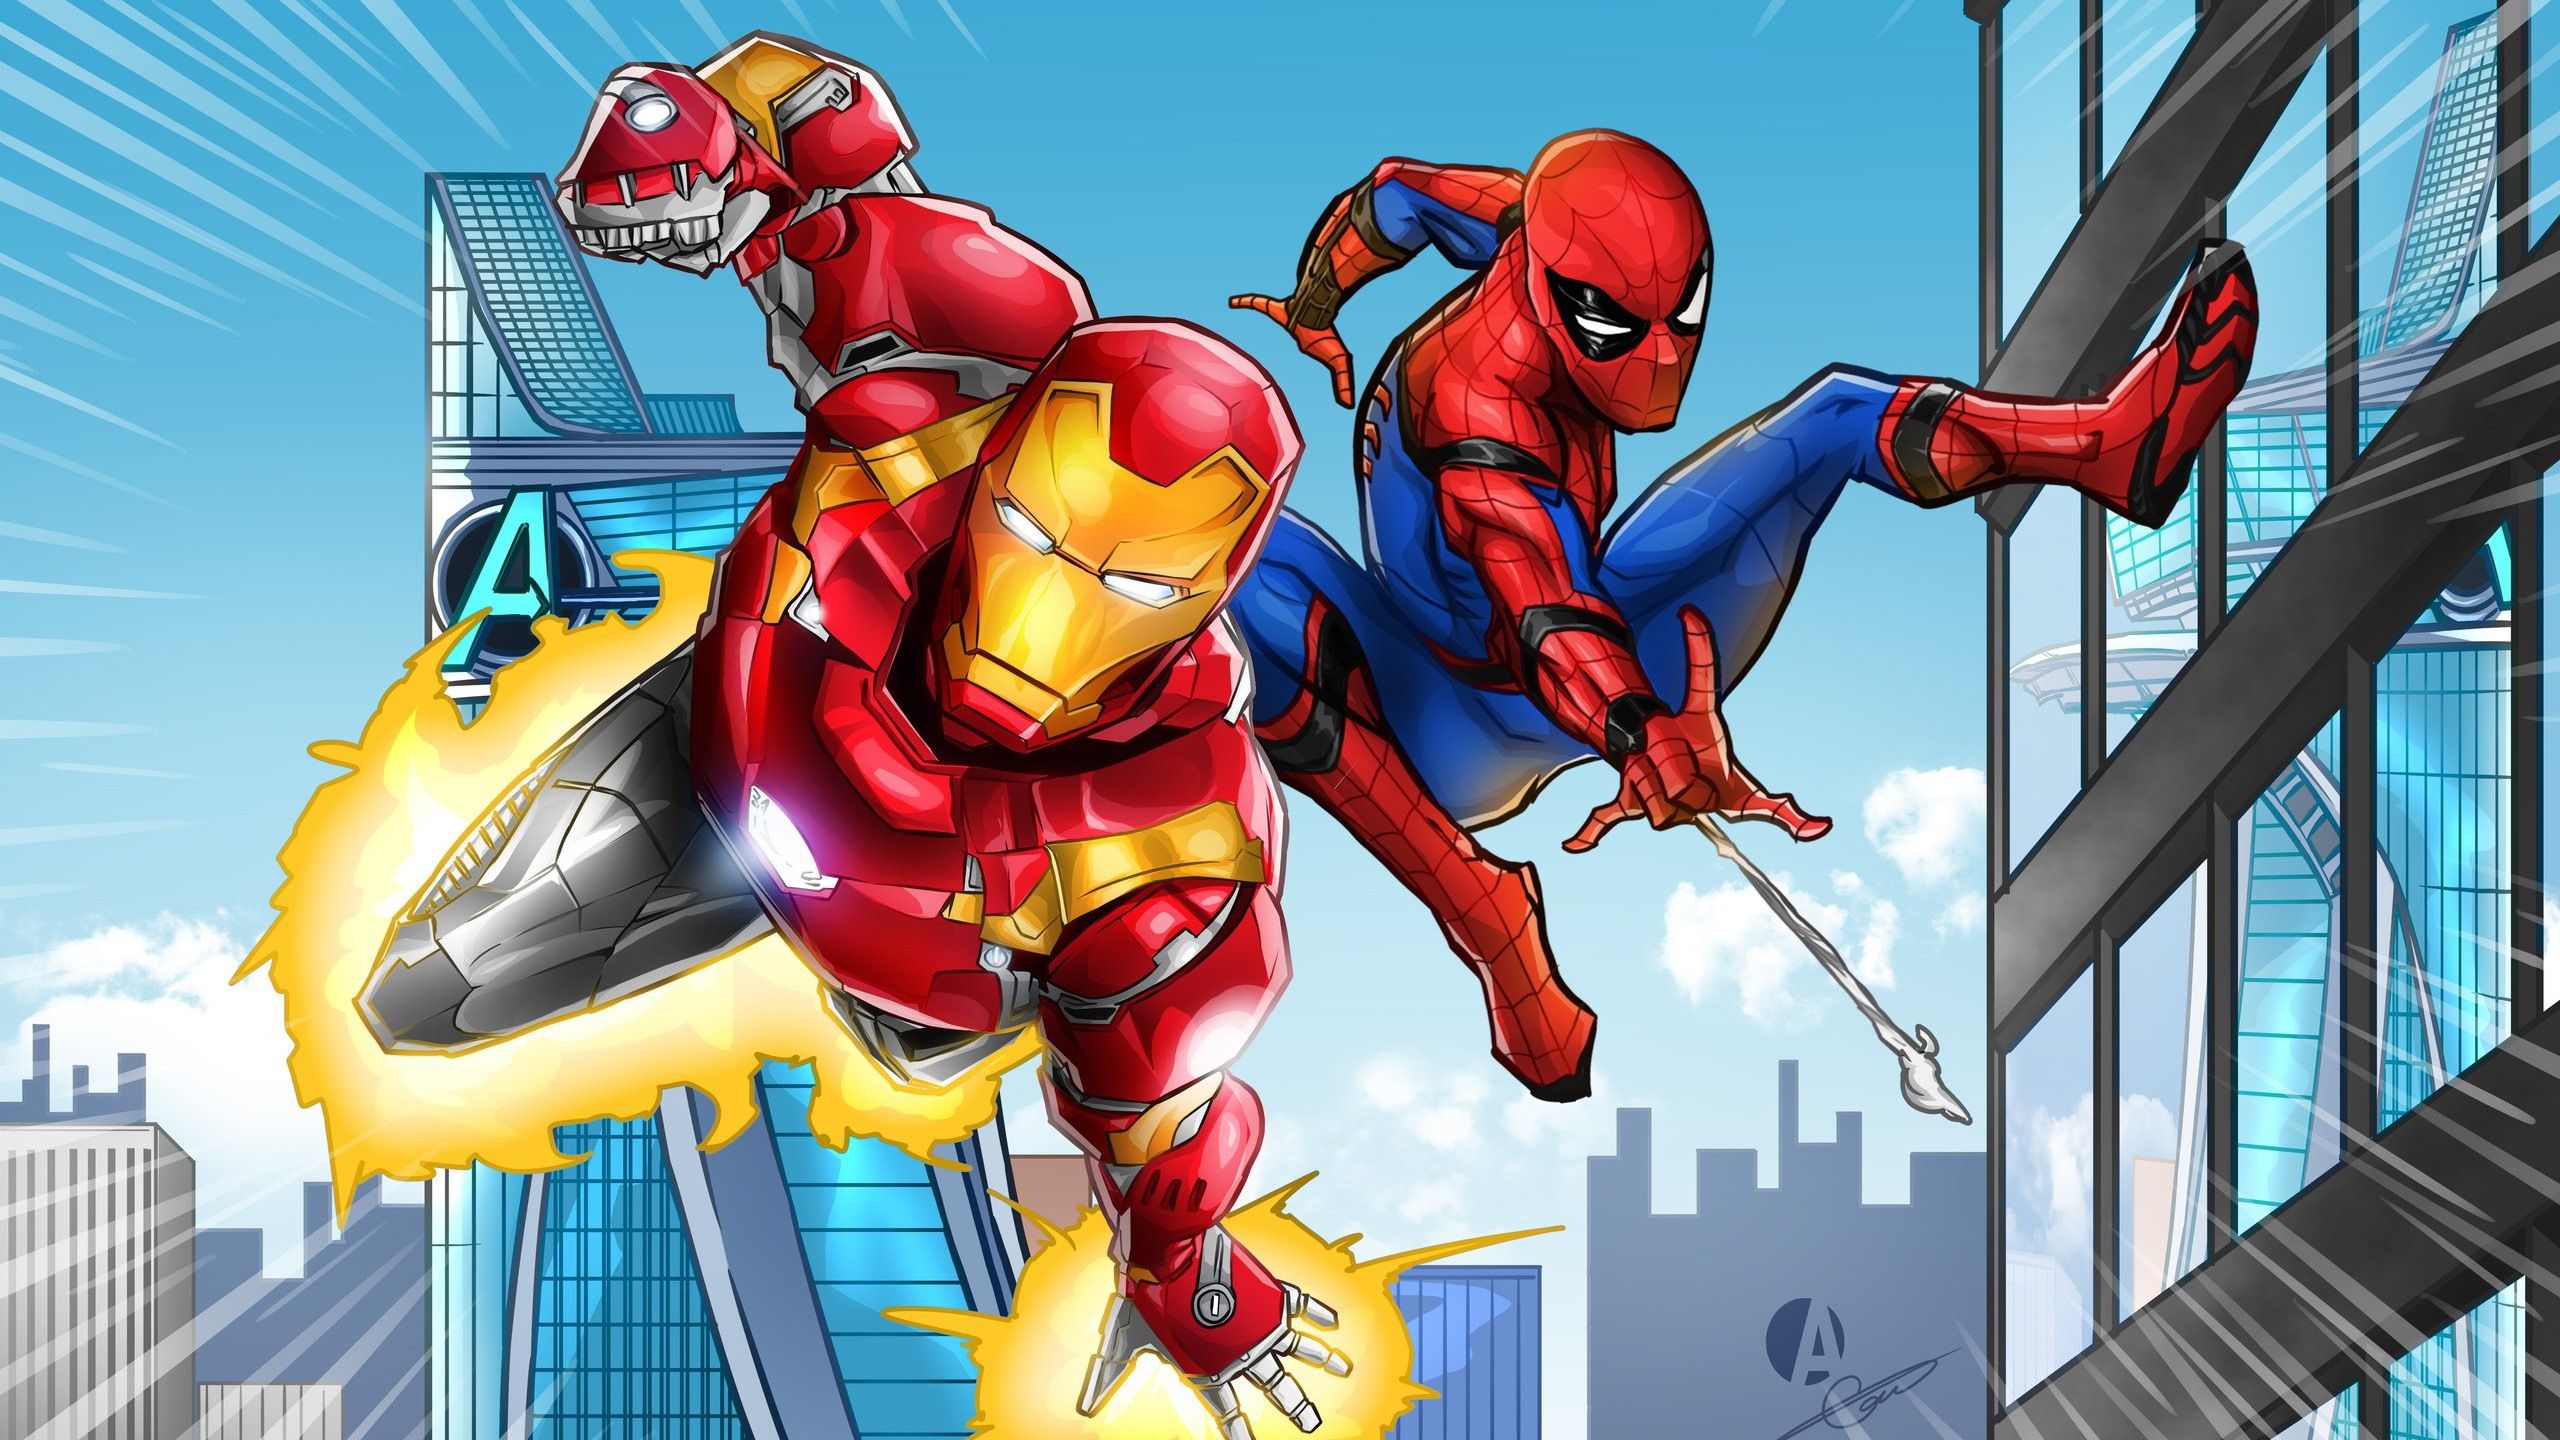 Wallpaper Iron Man And Spider Man, DC Comics 2560x1440 QHD Picture